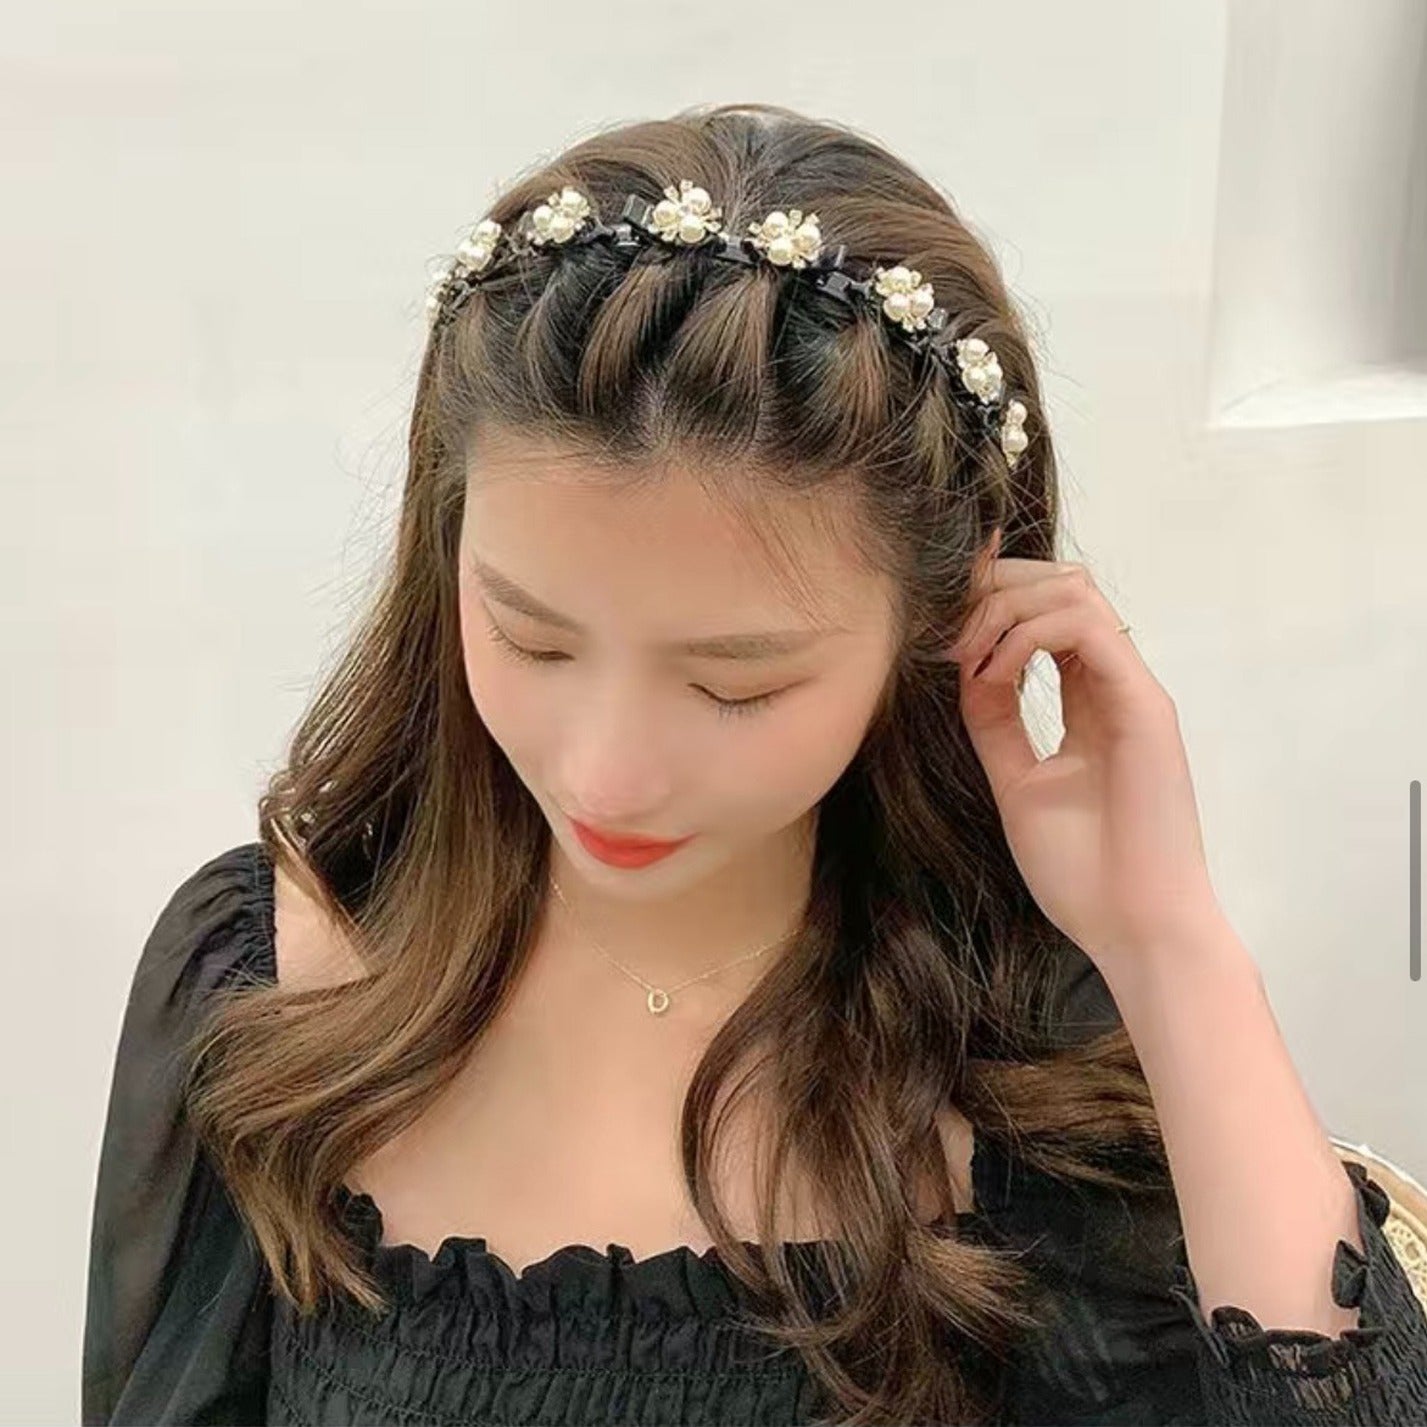 A lady worn Double Bangs Hairstyle Headband